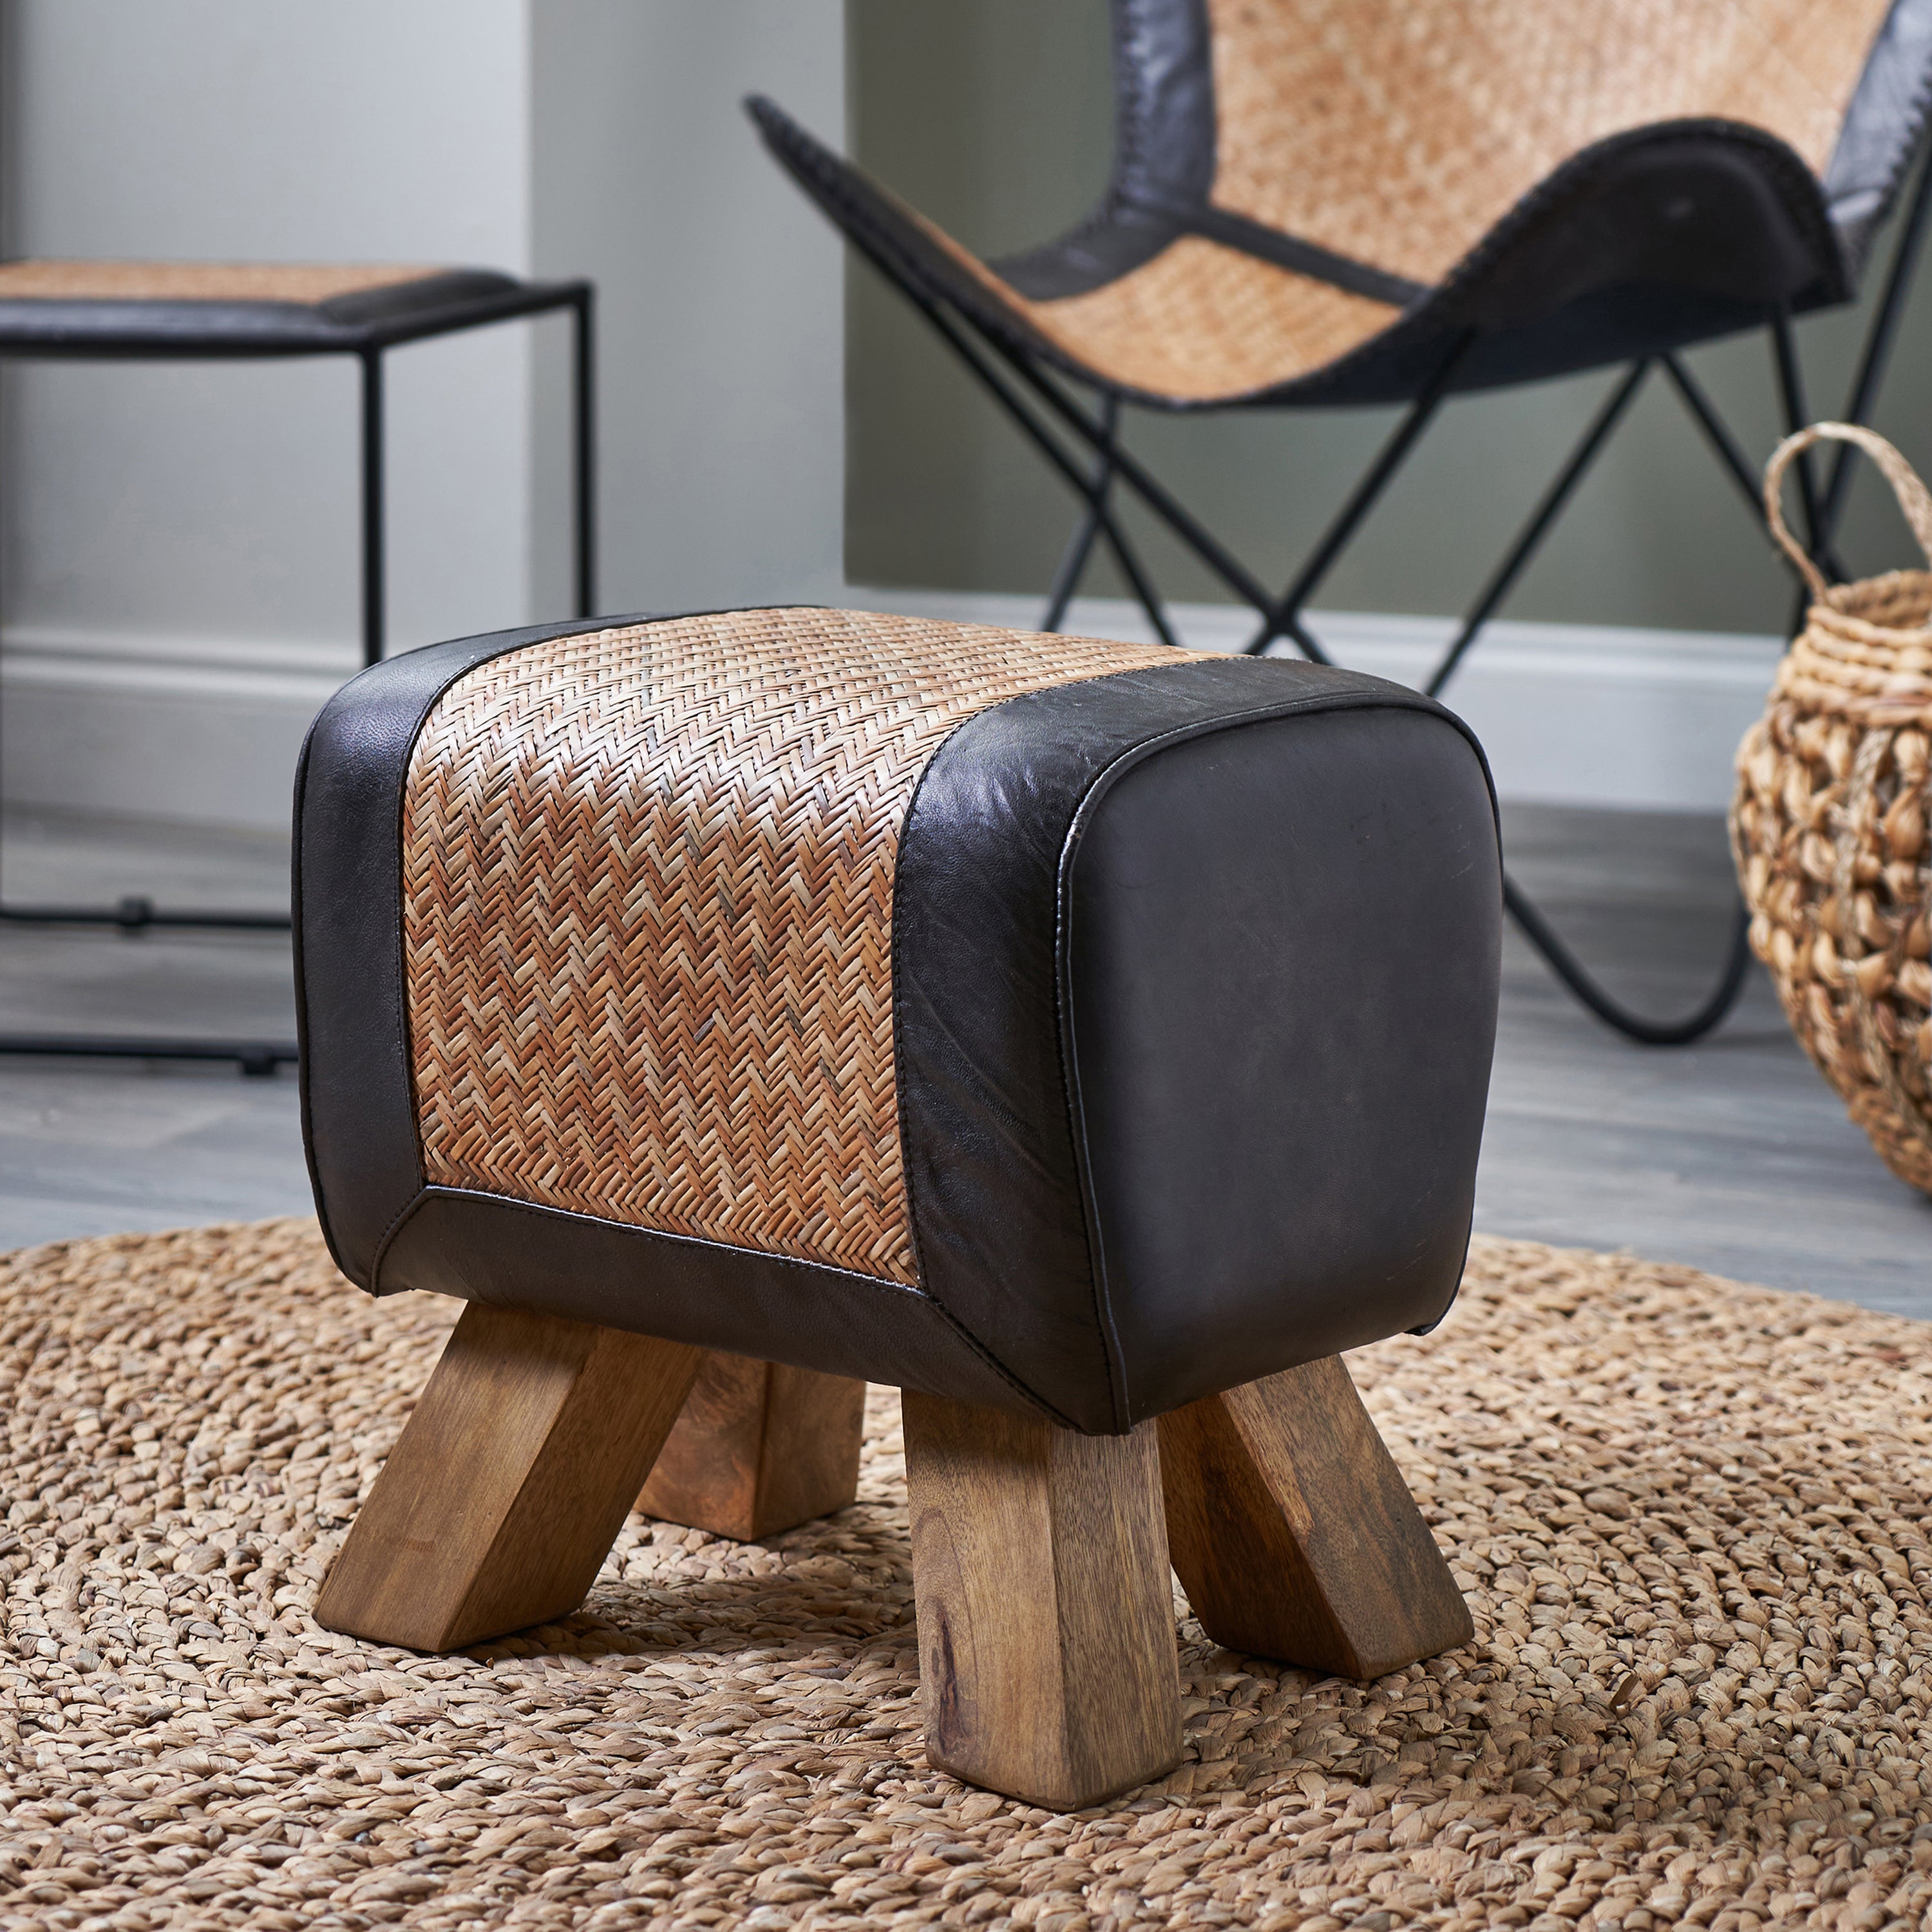 Pommello Leather and Rattan Stool Black